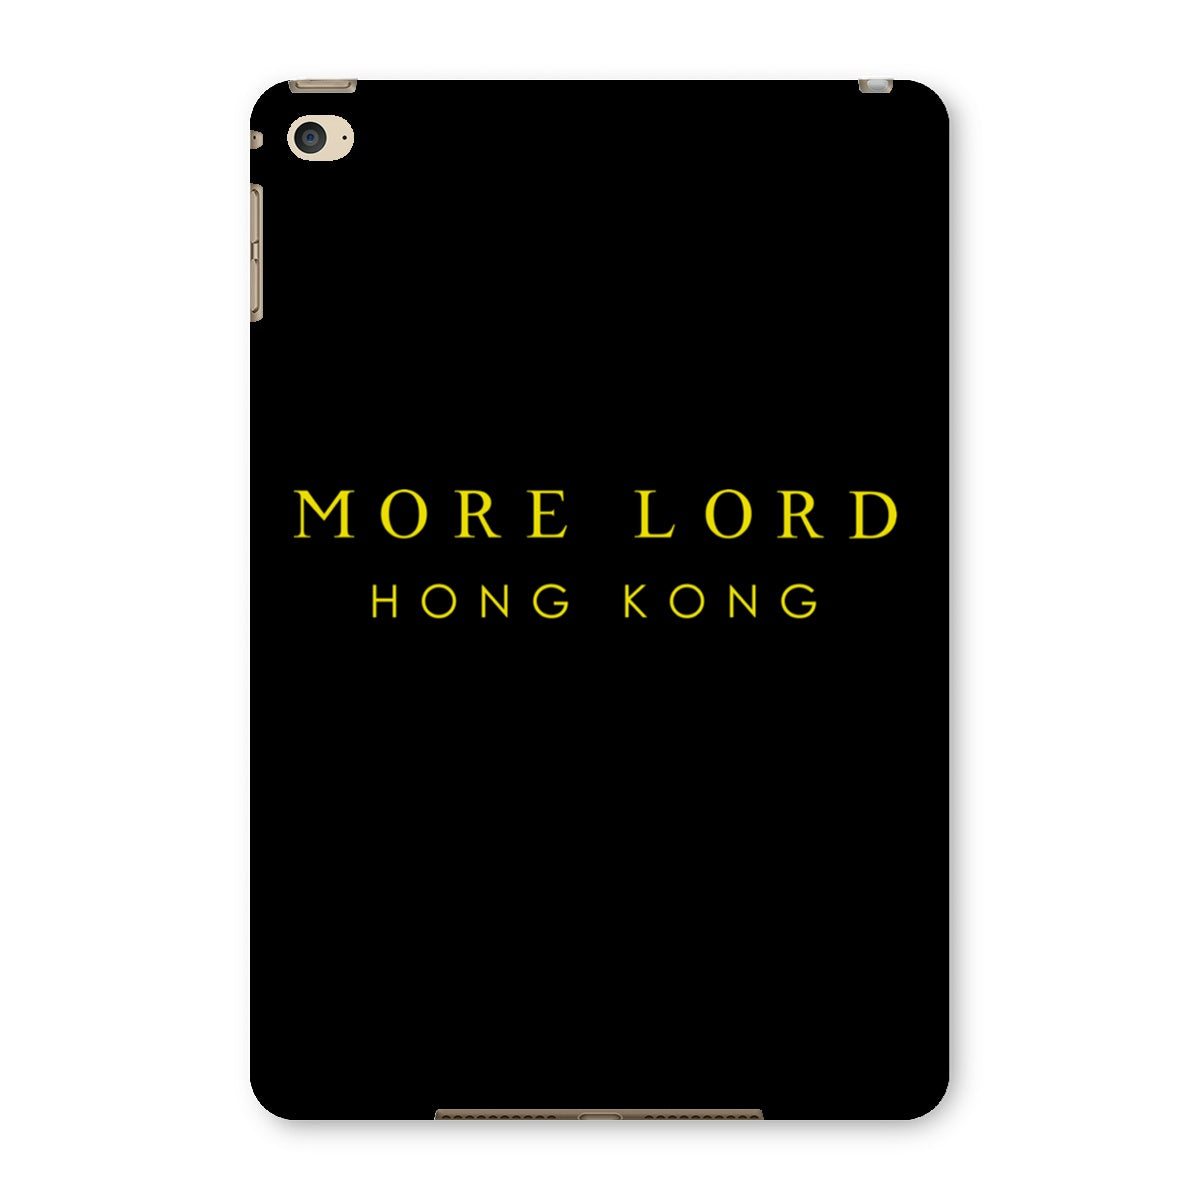 More Lord Hong Kong  Tablet Cases